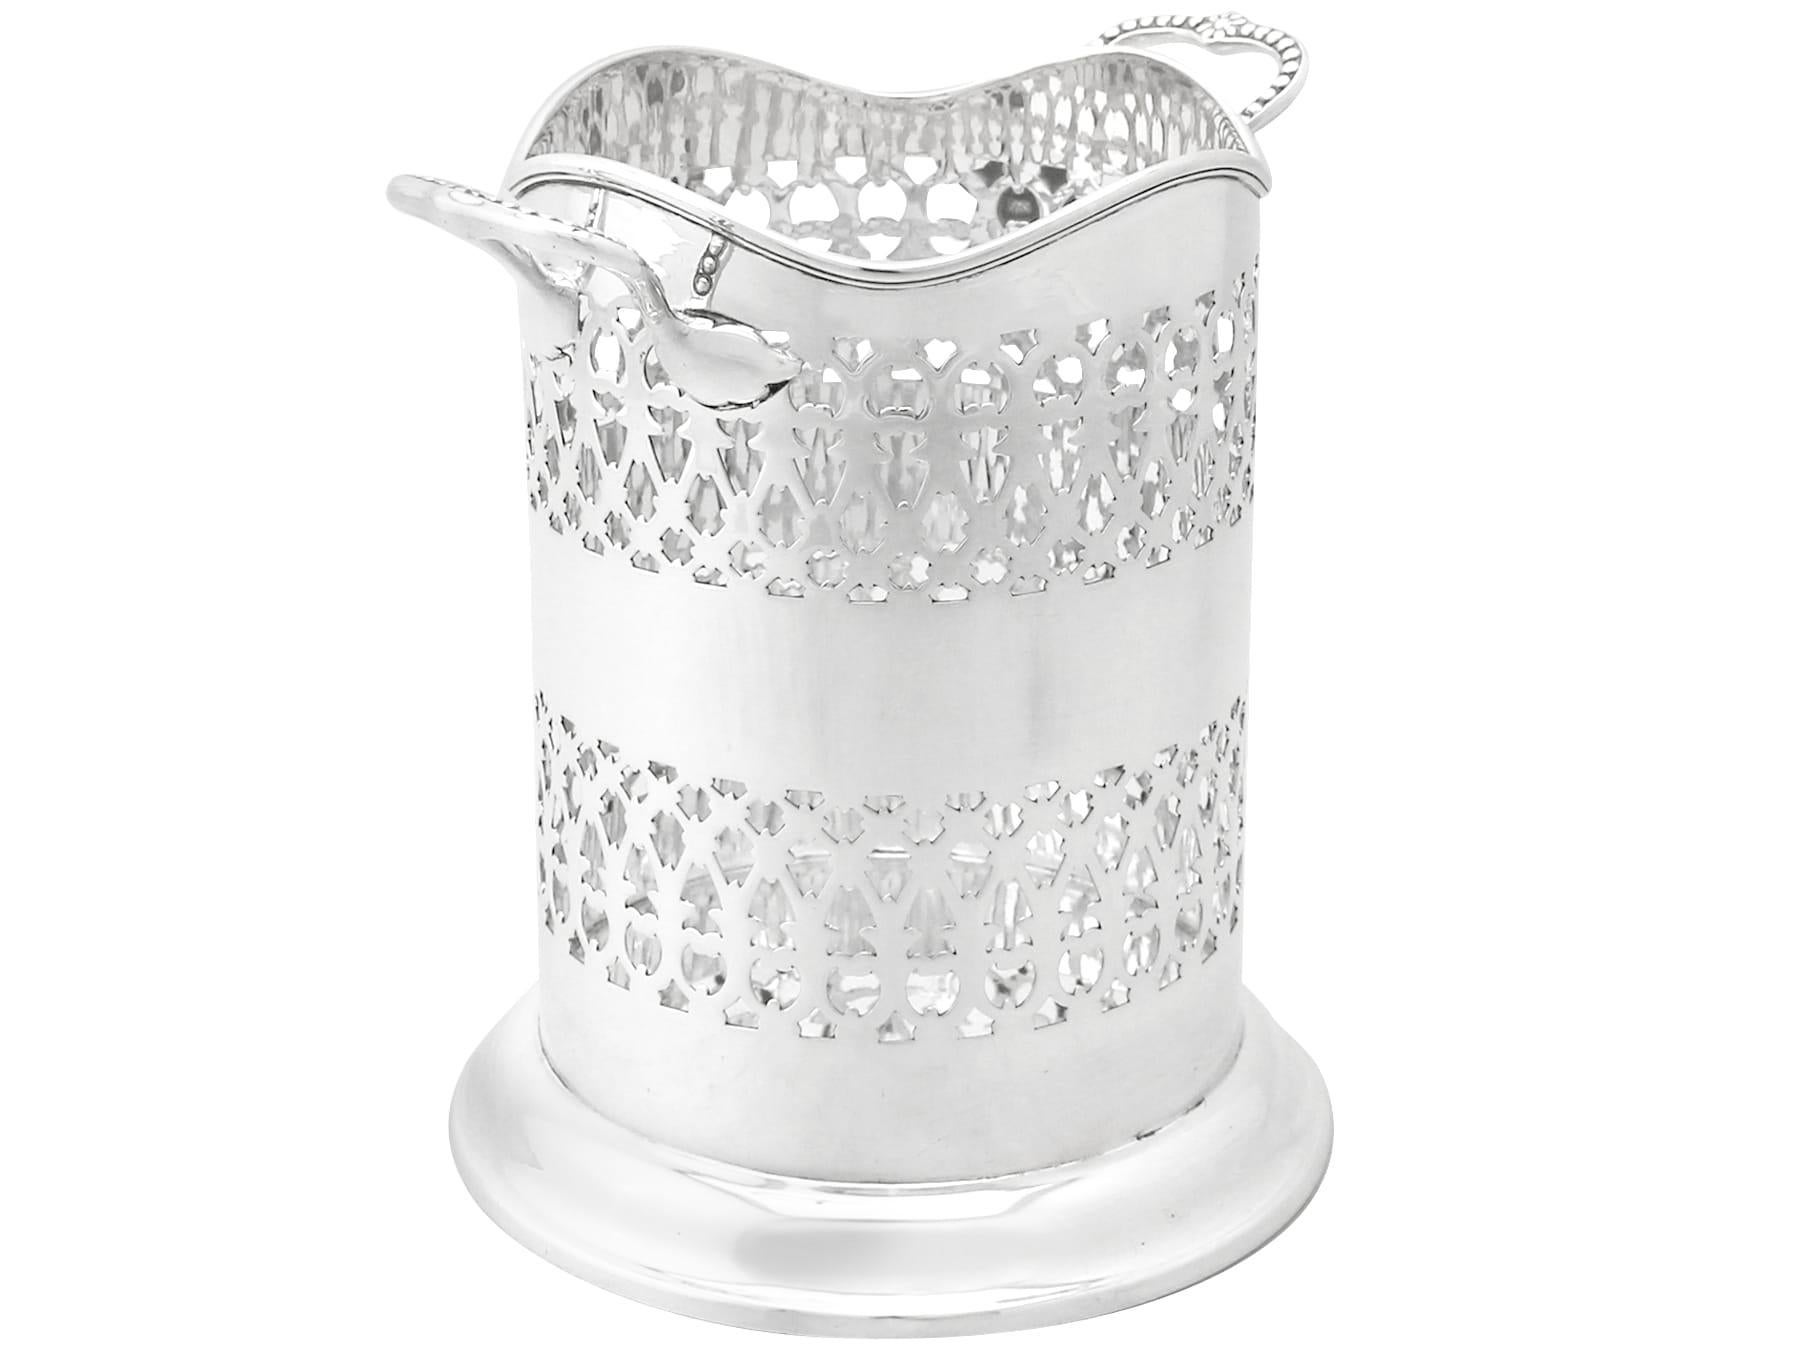 An exceptional, fine and impressive antique George V English sterling silver bottle coaster; an addition to our ornamental silverware collection.

This exceptional antique George V sterling silver bottle coaster has a plain cylindrical form to a